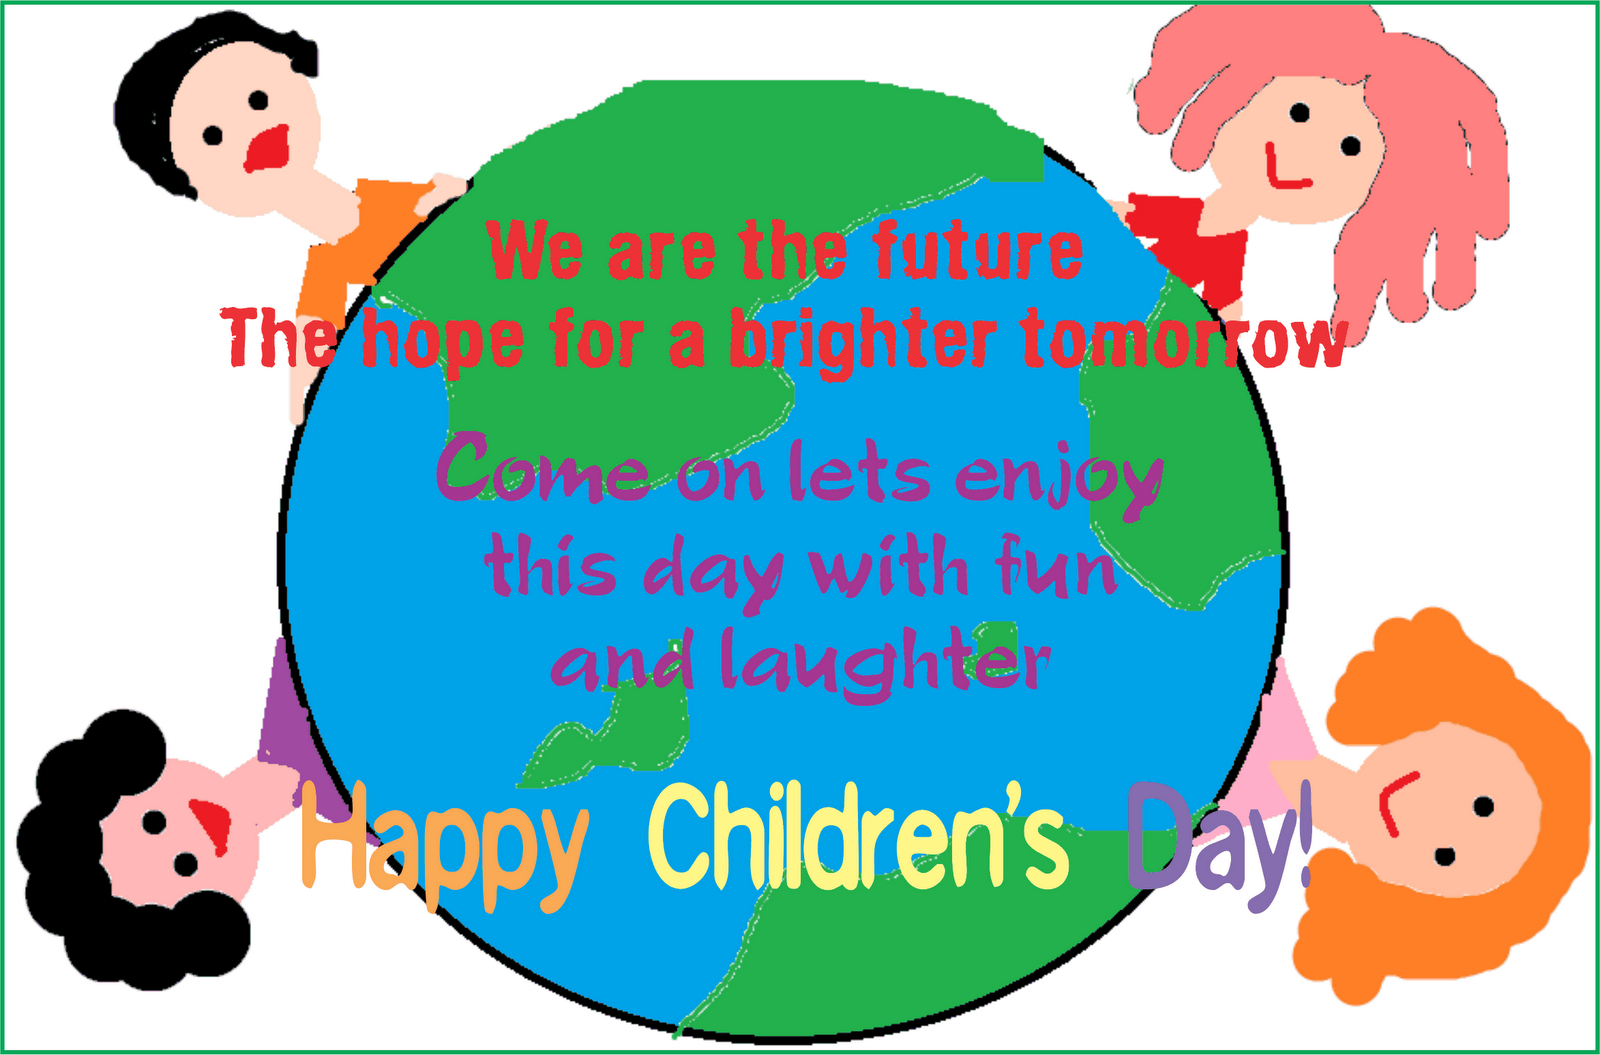 Childrens-Day-card-image